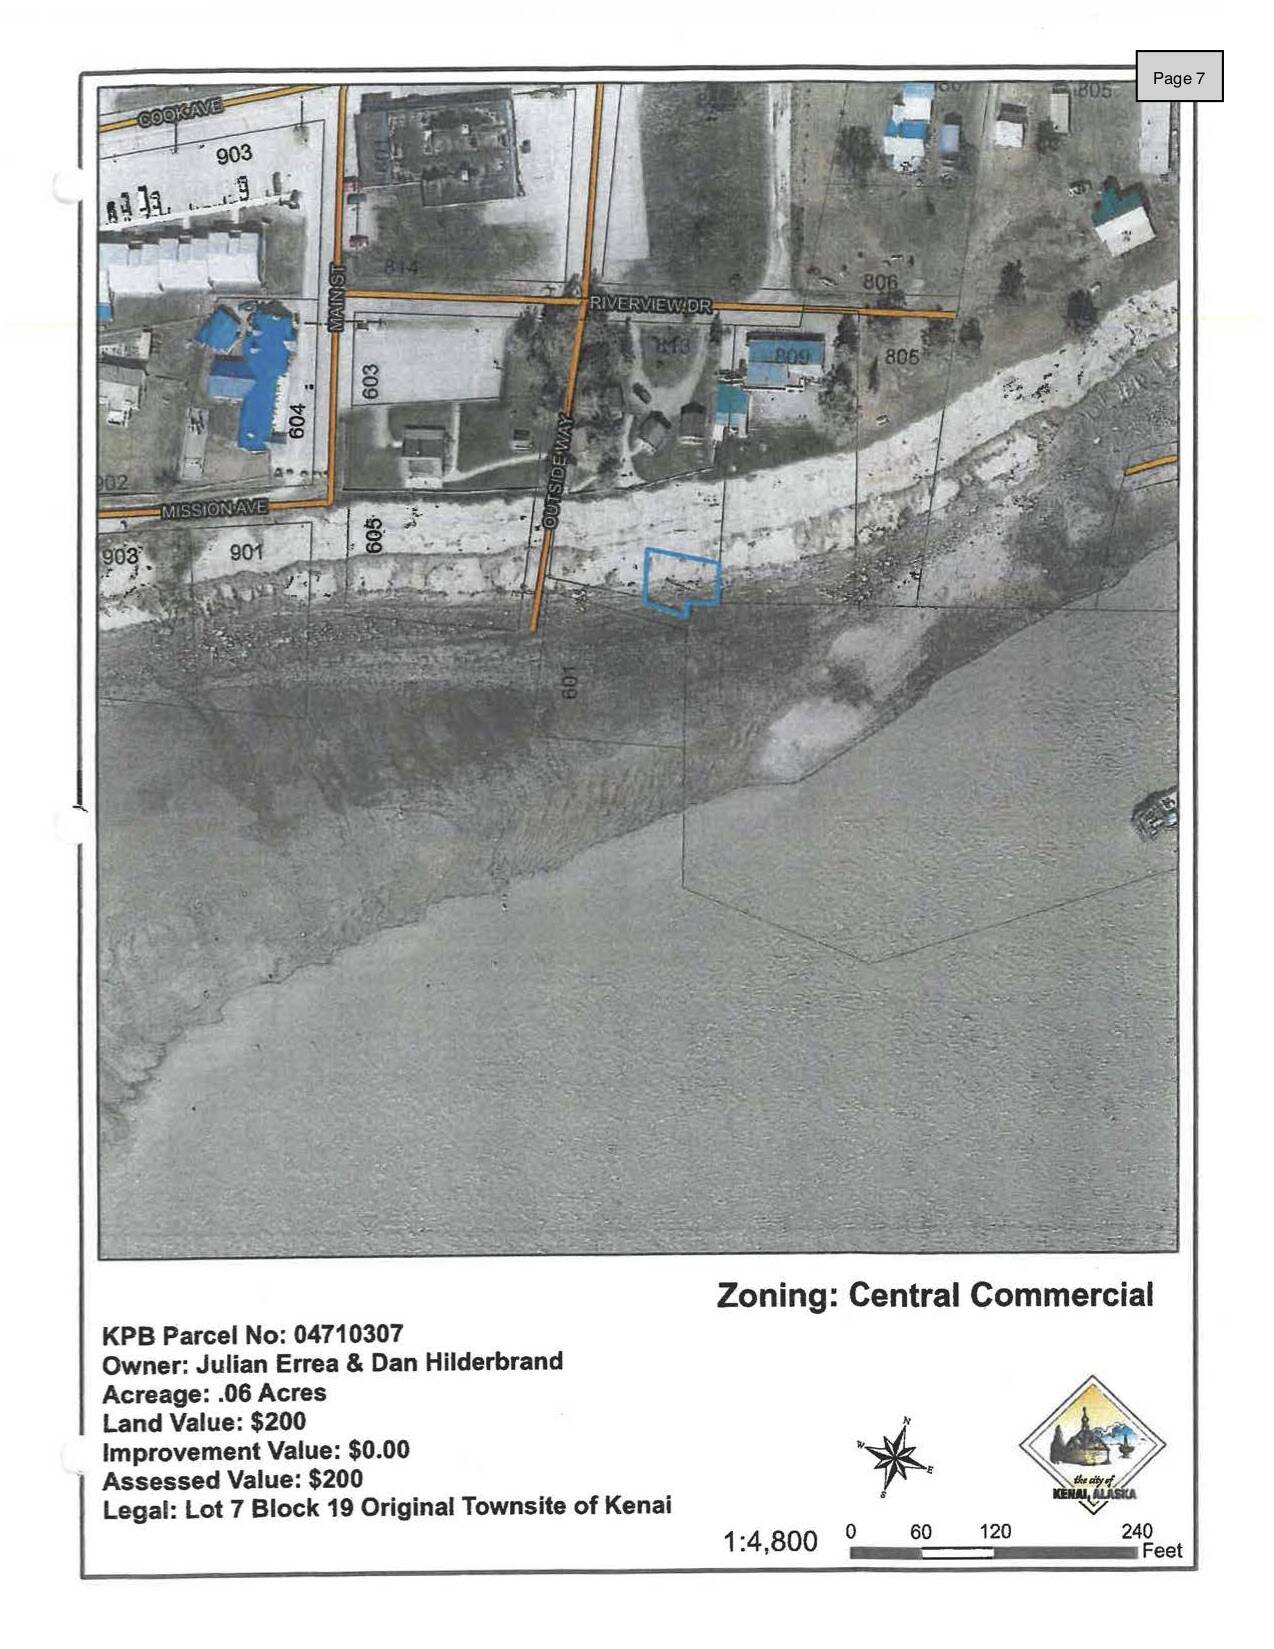 An aerial assessment document provided to Kenai City Council members shows a parcel of land near Outside Way and the Kenai Bible Church in Old Town Kenai at the toe of the bluff. The parcel is being purchased as part of a bluff stabilization project. (Map via City of Kenai)